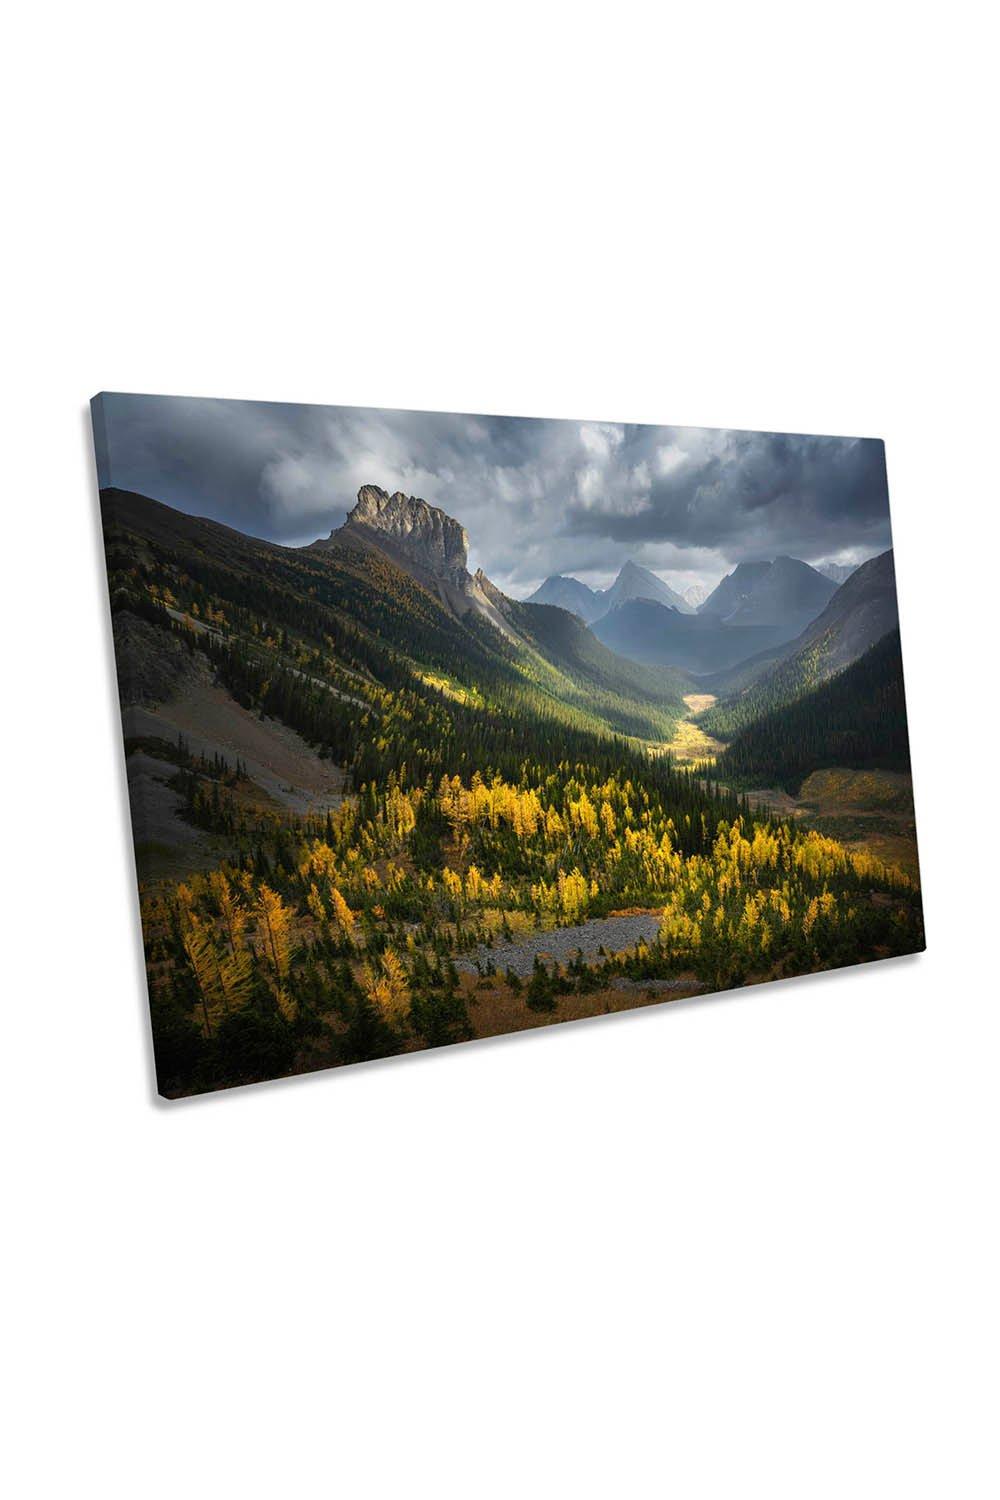 Fall in Smutwood Valley Rockies Canada Canvas Wall Art Picture Print